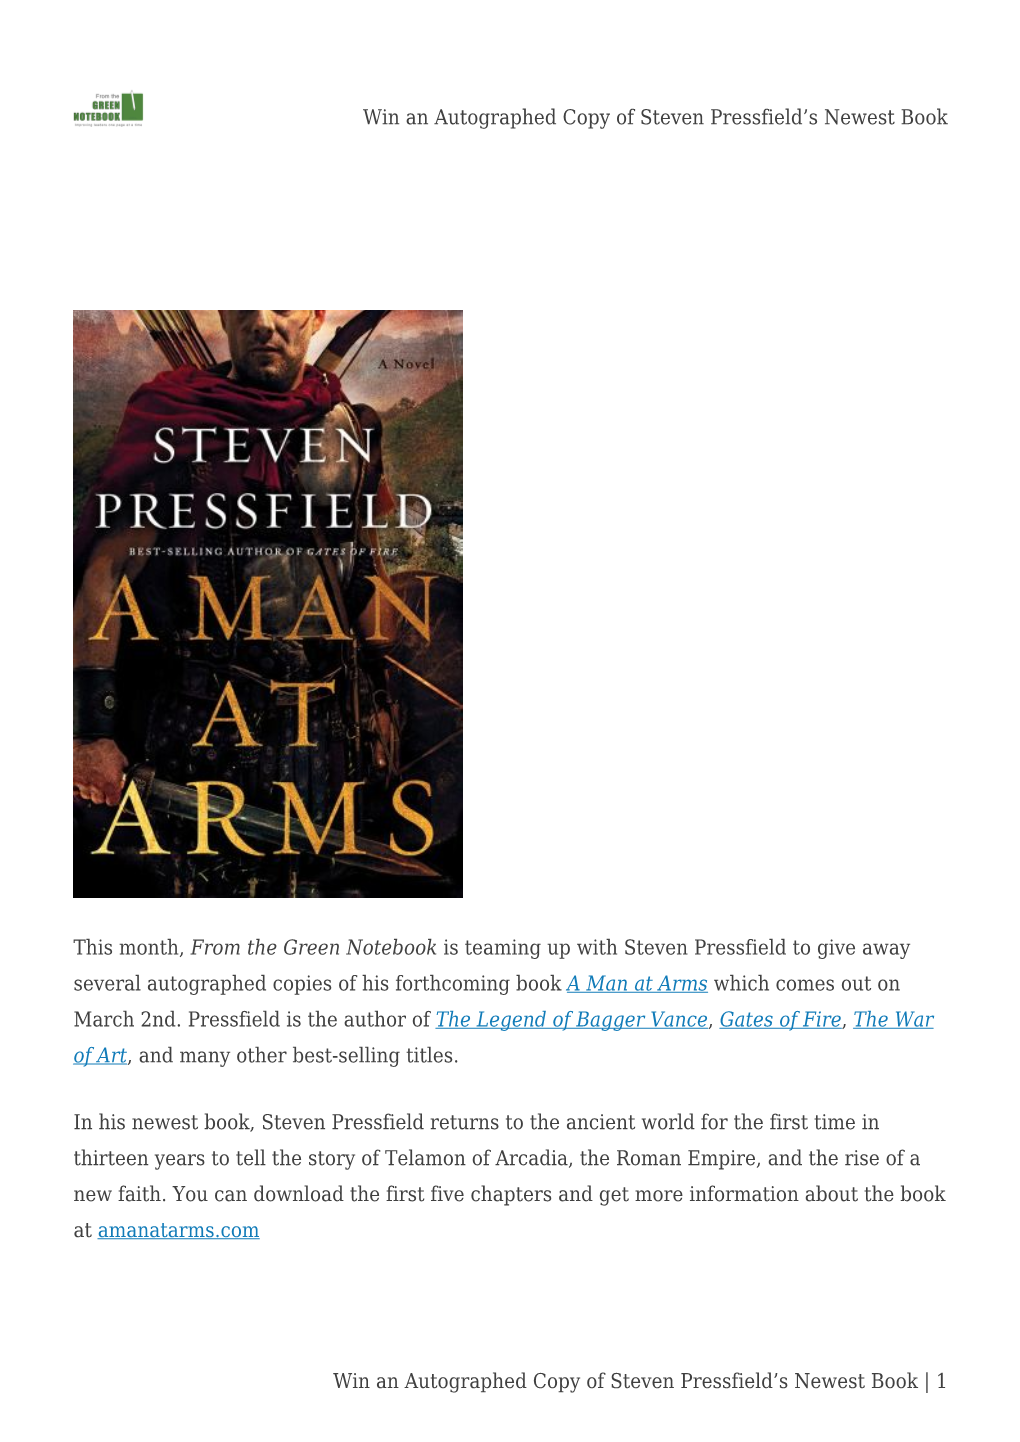 Win an Autographed Copy of Steven Pressfield's Newest Book